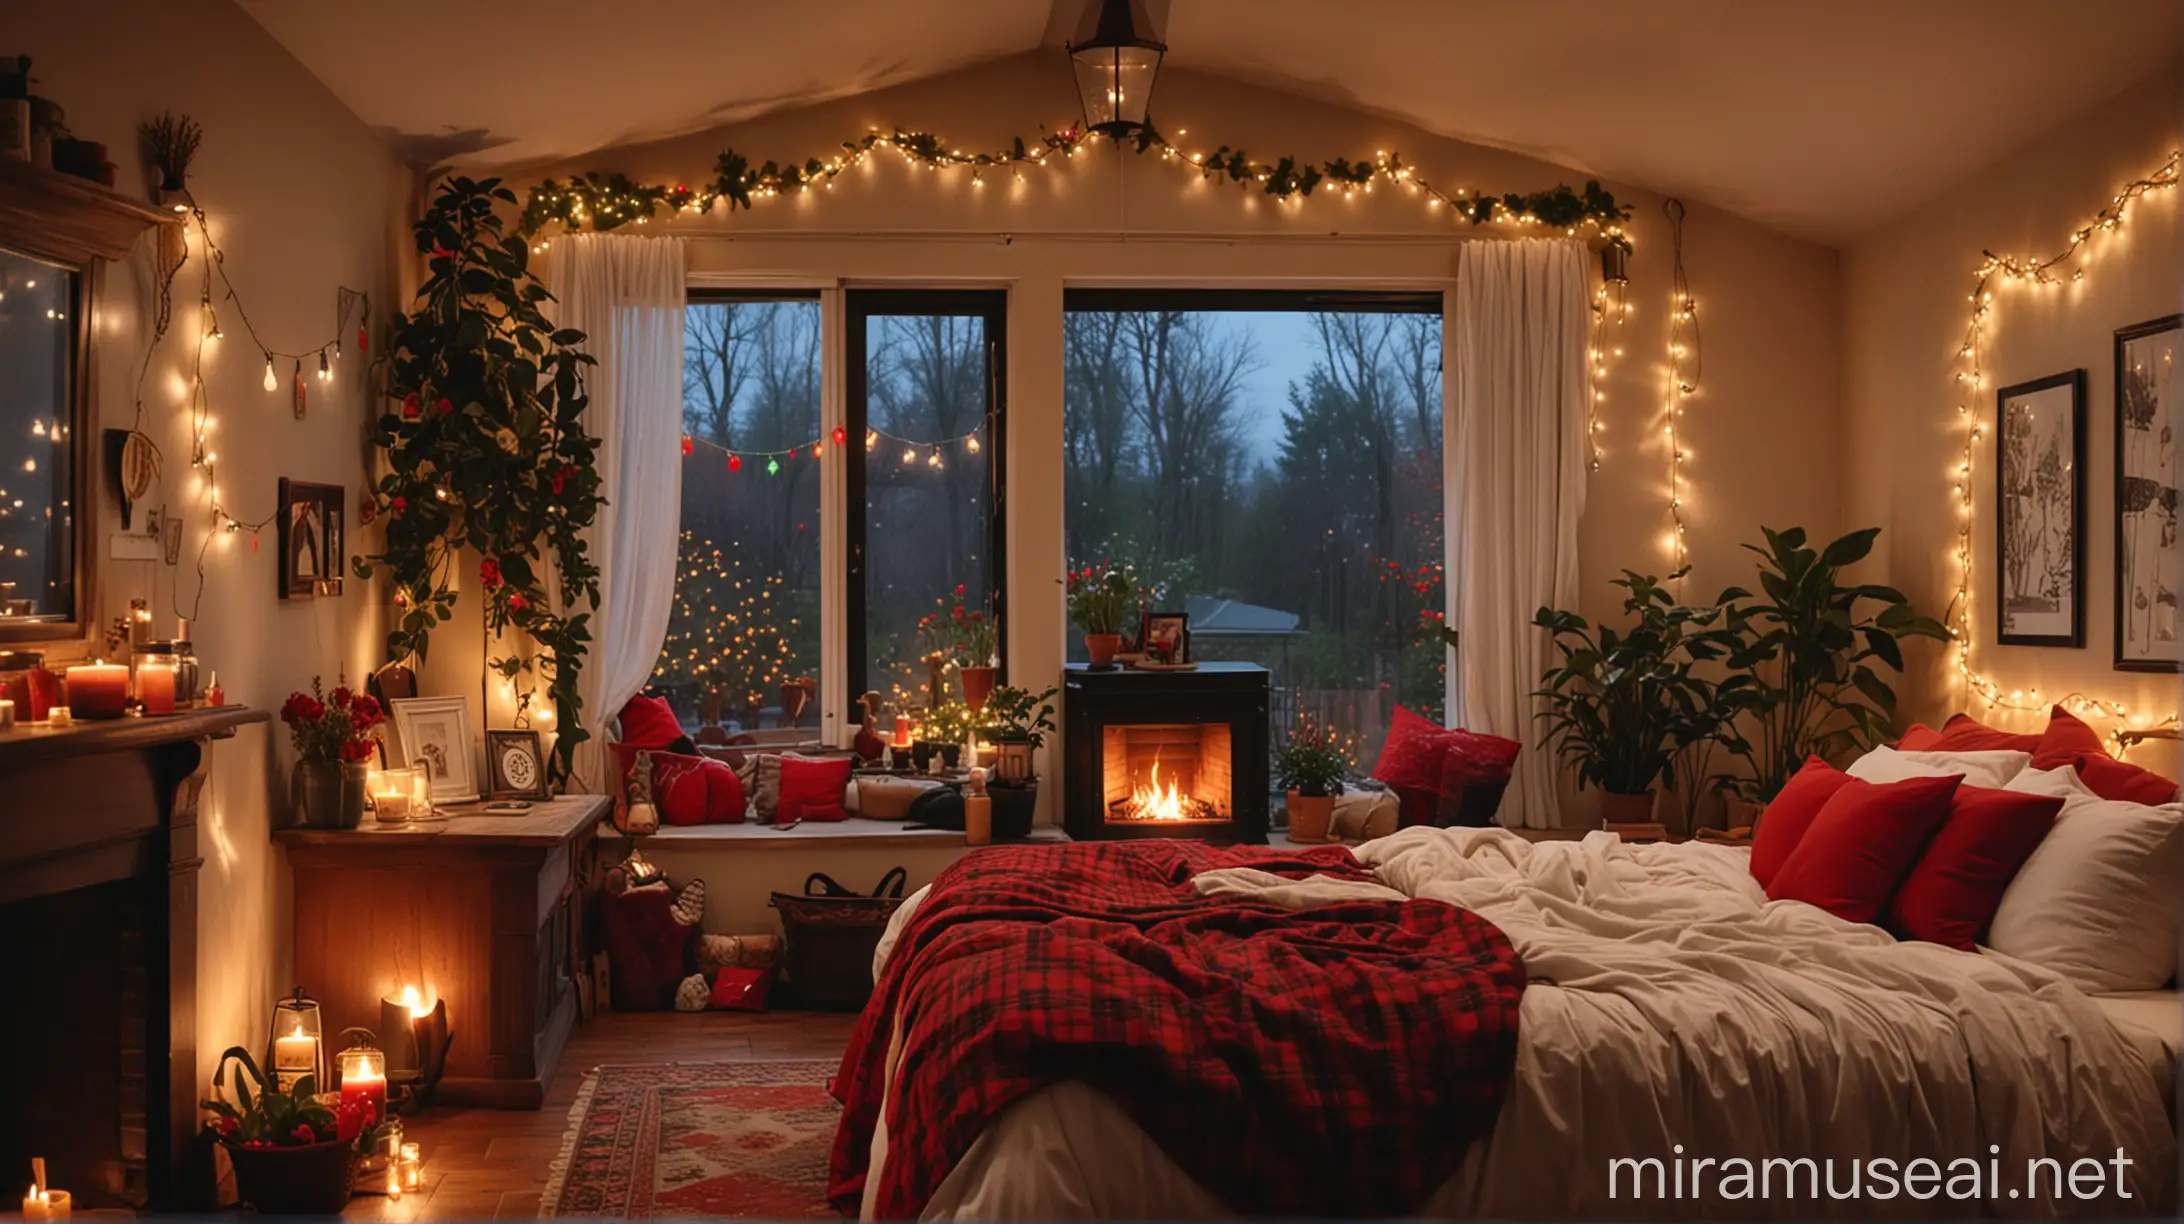 Cozy Bedroom with Fireplace and Rainy Fall Night View